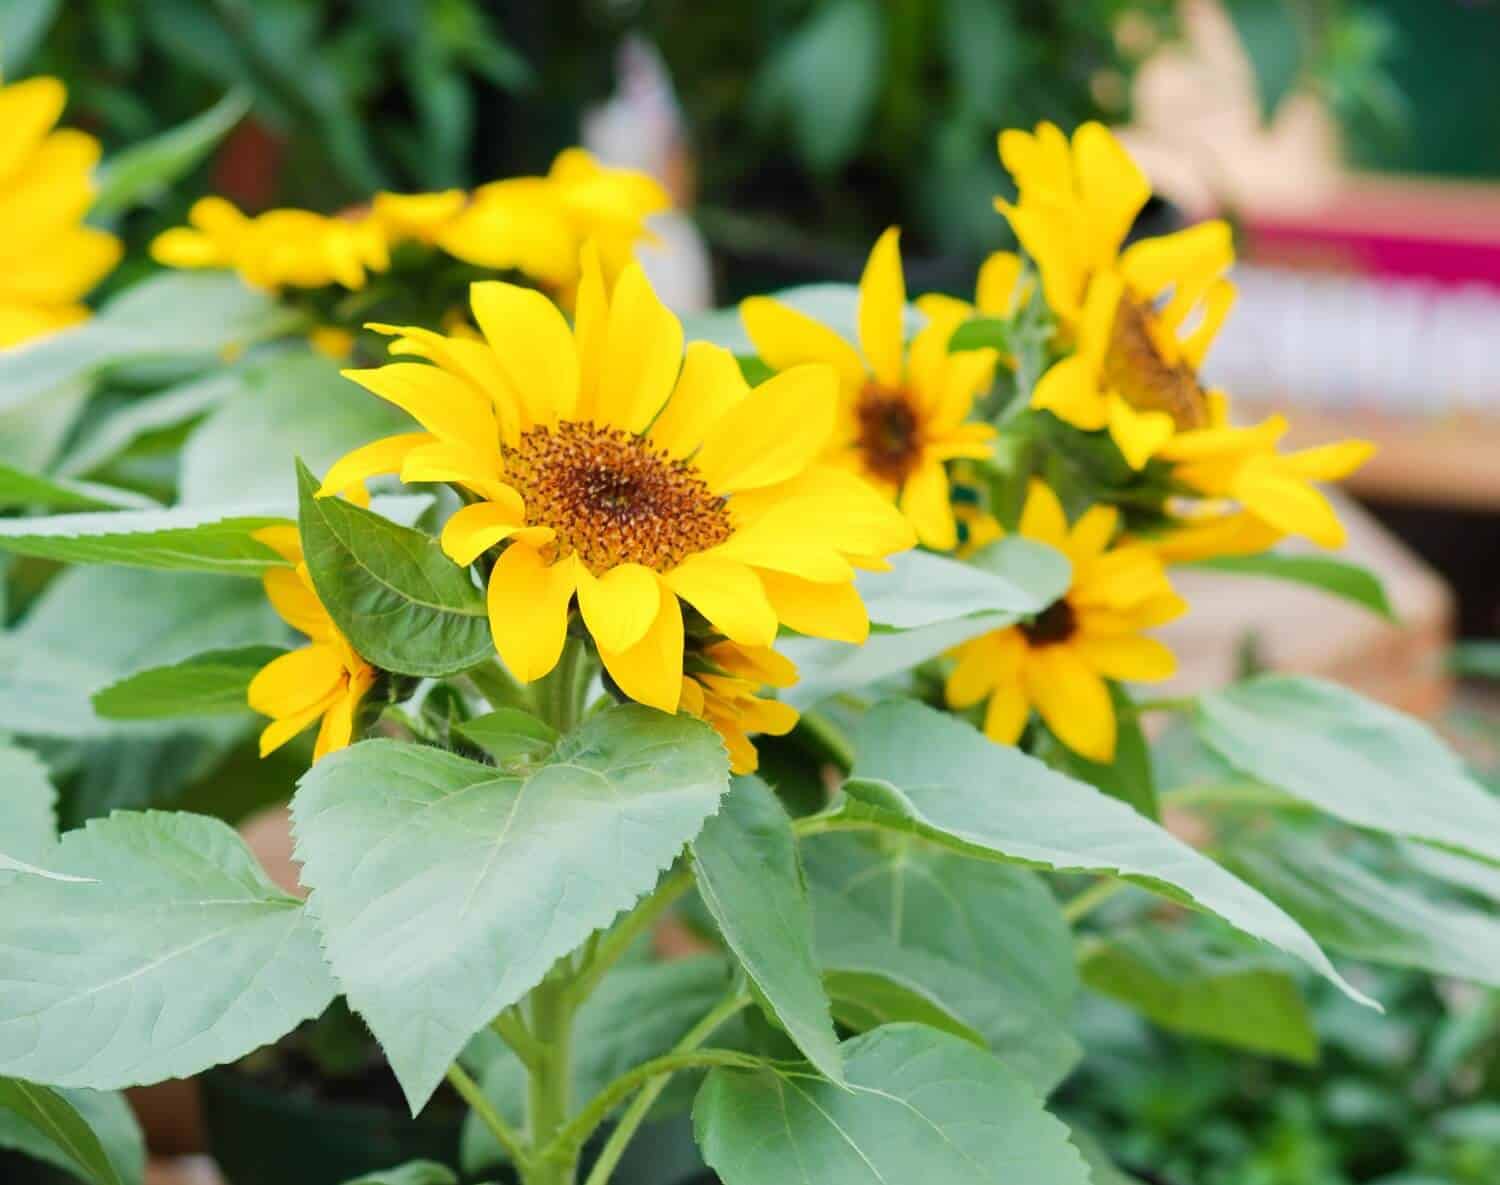 When To Cut Down Sunflowers